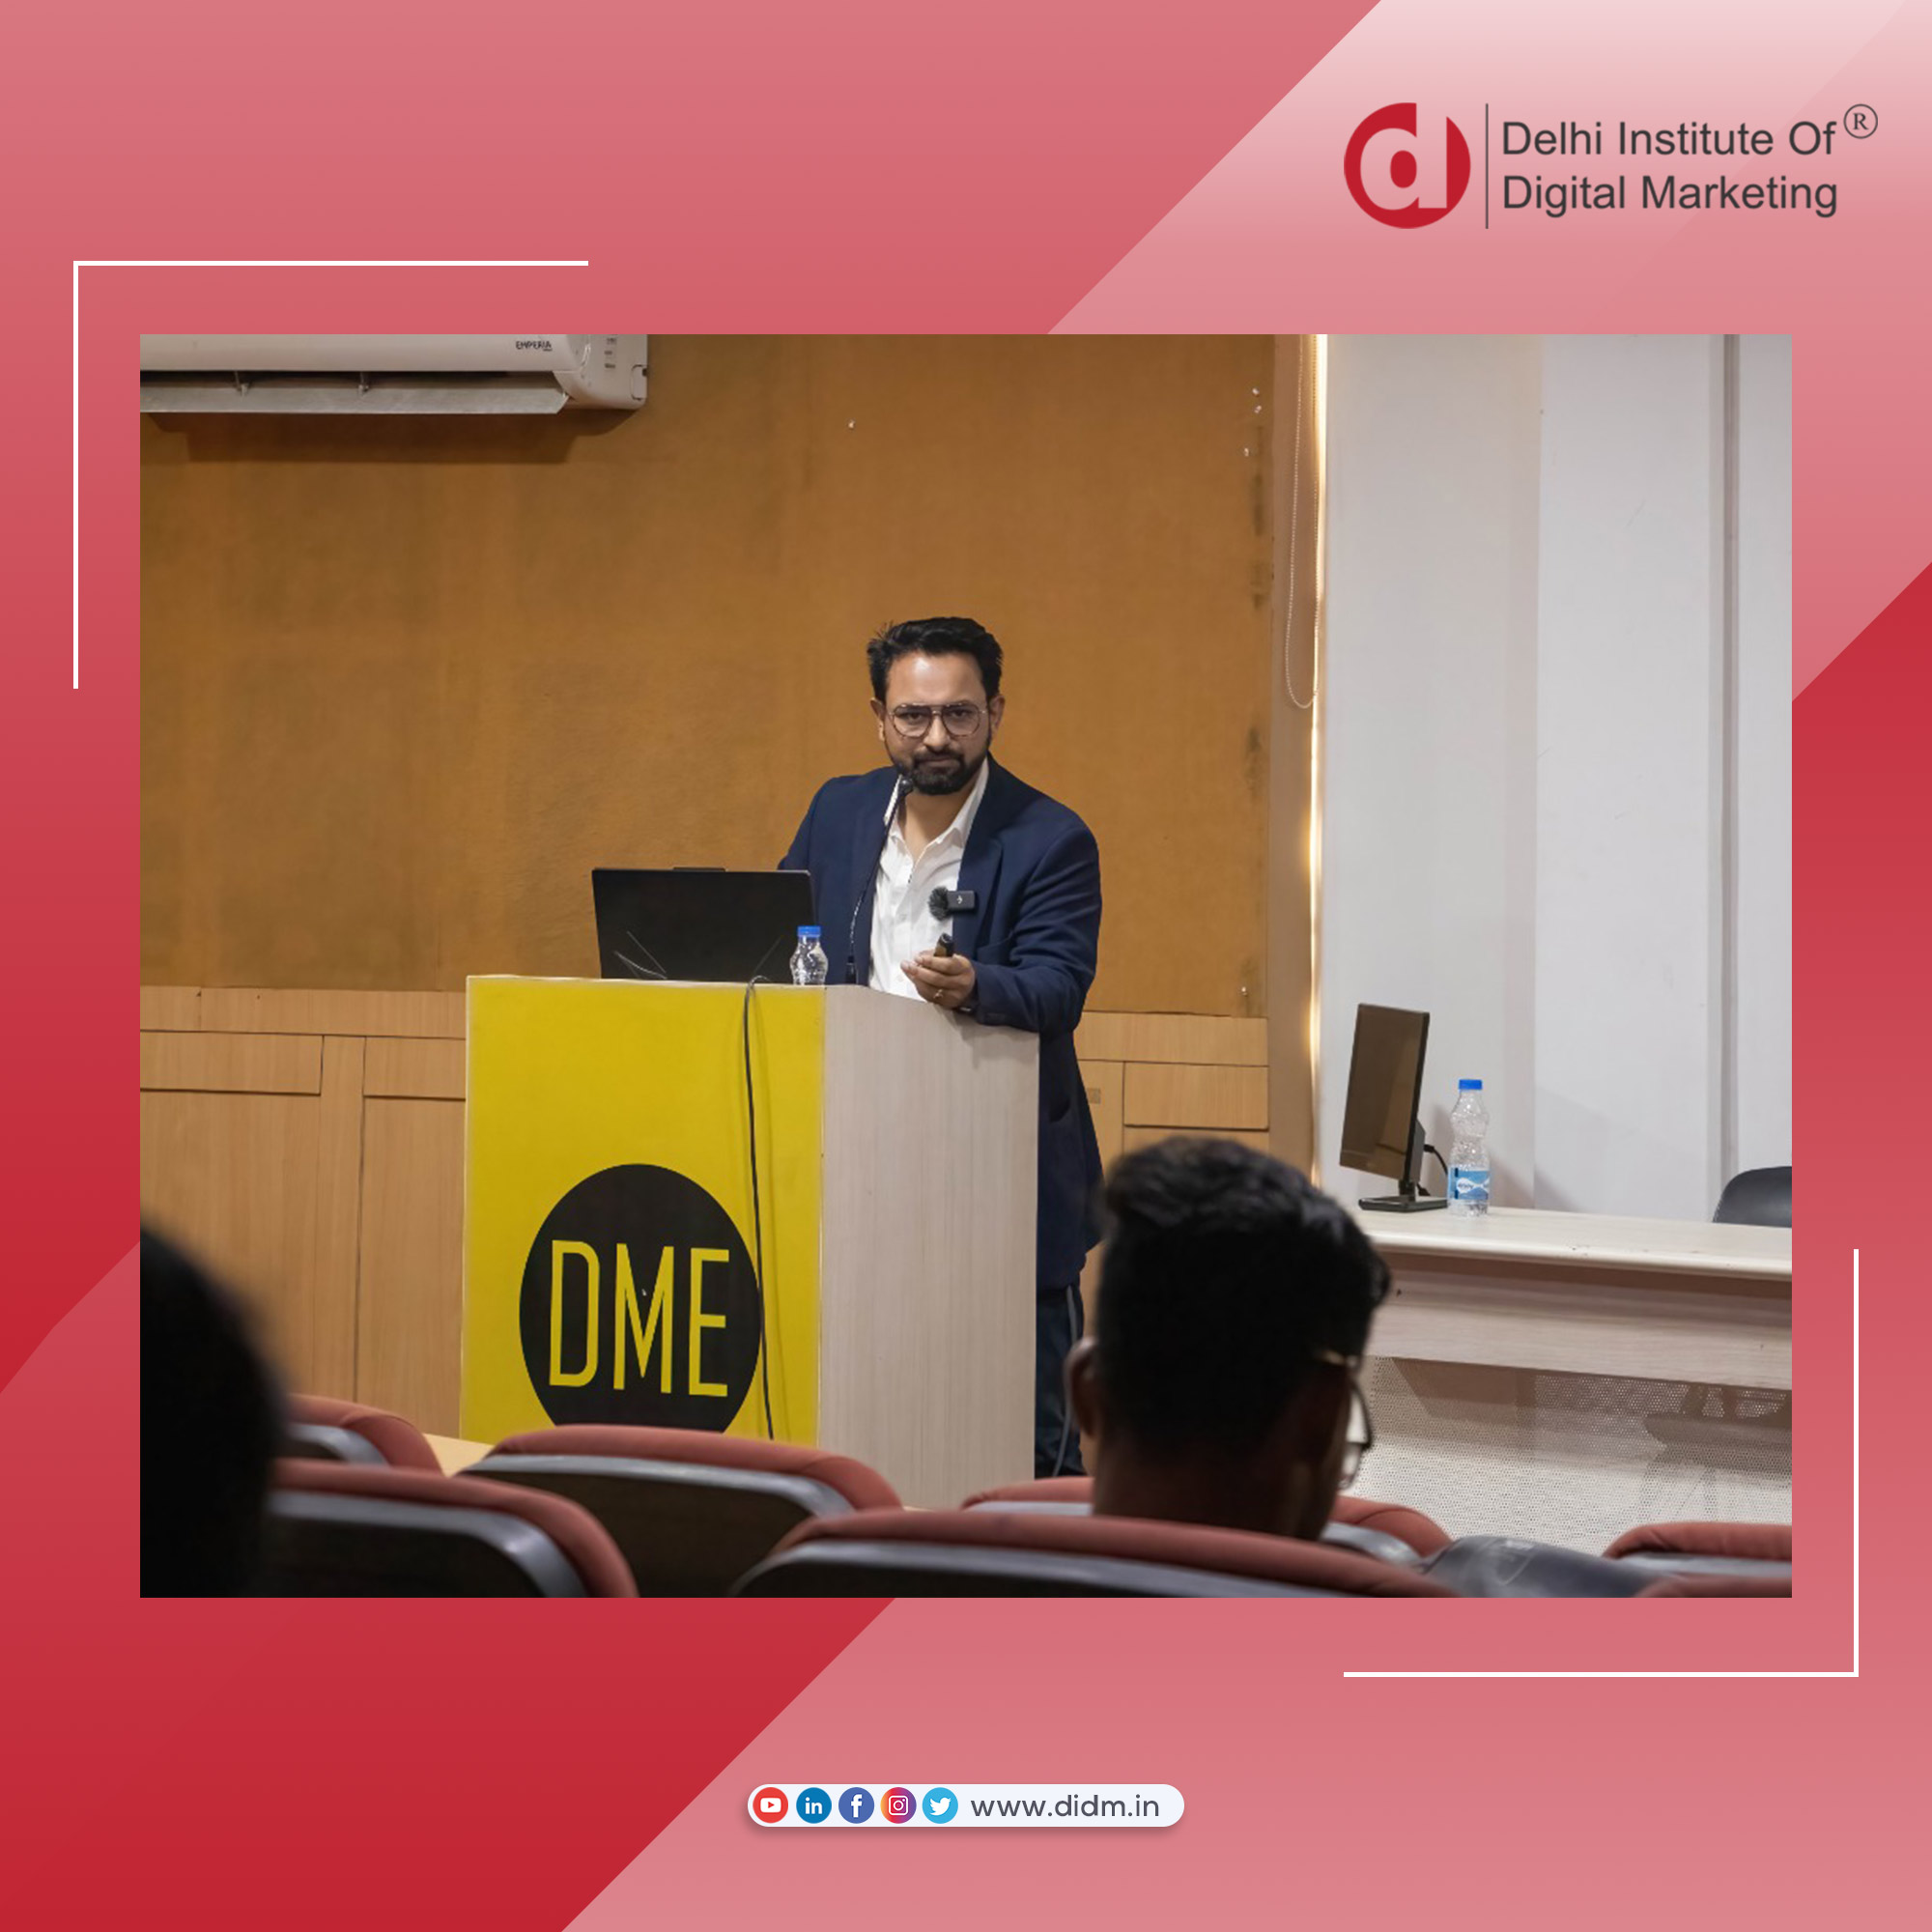 DIDM Conducts a Seminar on Marketing Automation at DME, Noida